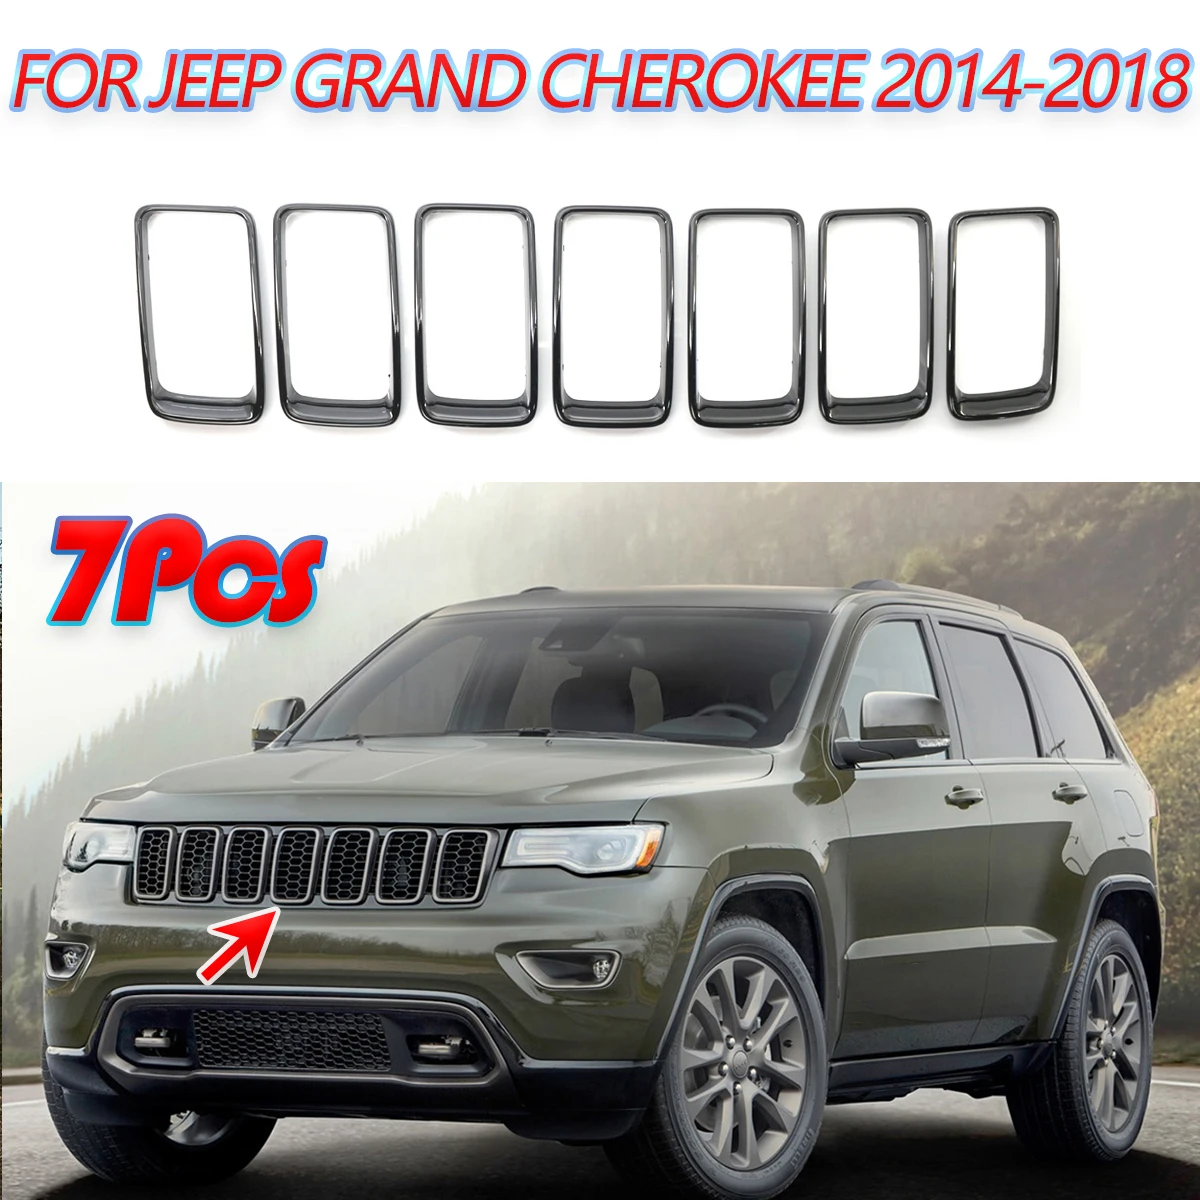 

Car Grill Ring Front Grille Inserts Cover Trim Kit 7 Pcs/Set Gloss Black /Silver Decorate For Jeep Grand Cherokee 2014 2015 2016